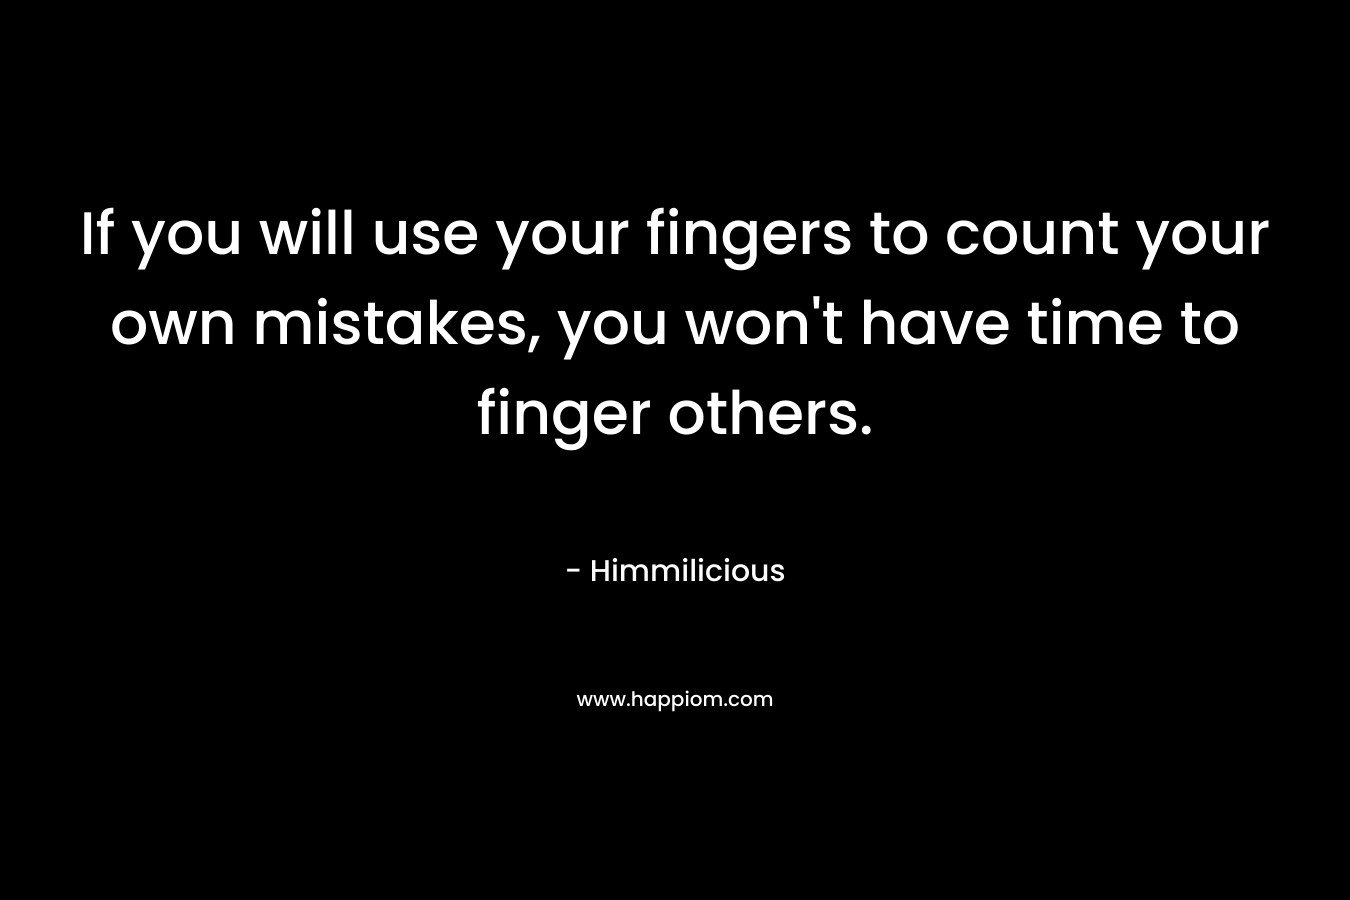 If you will use your fingers to count your own mistakes, you won't have time to finger others.